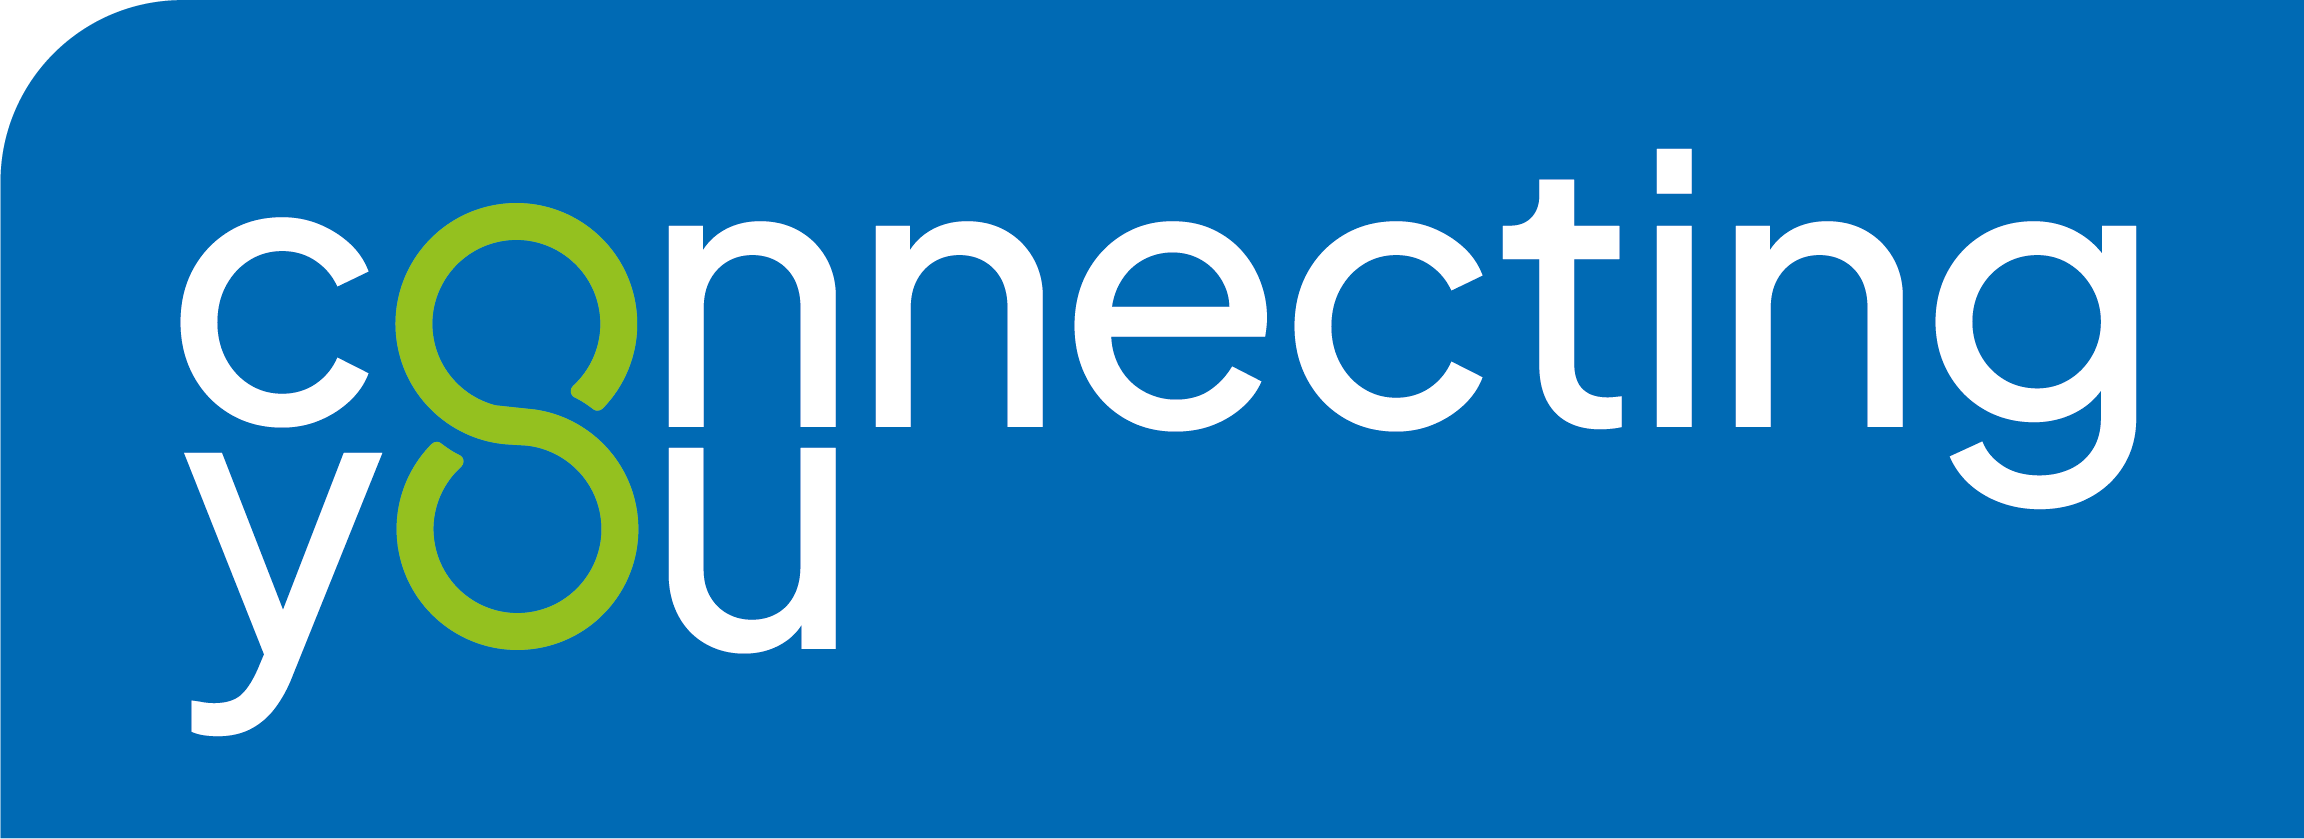 Connecting You Logo Blue_Green negative